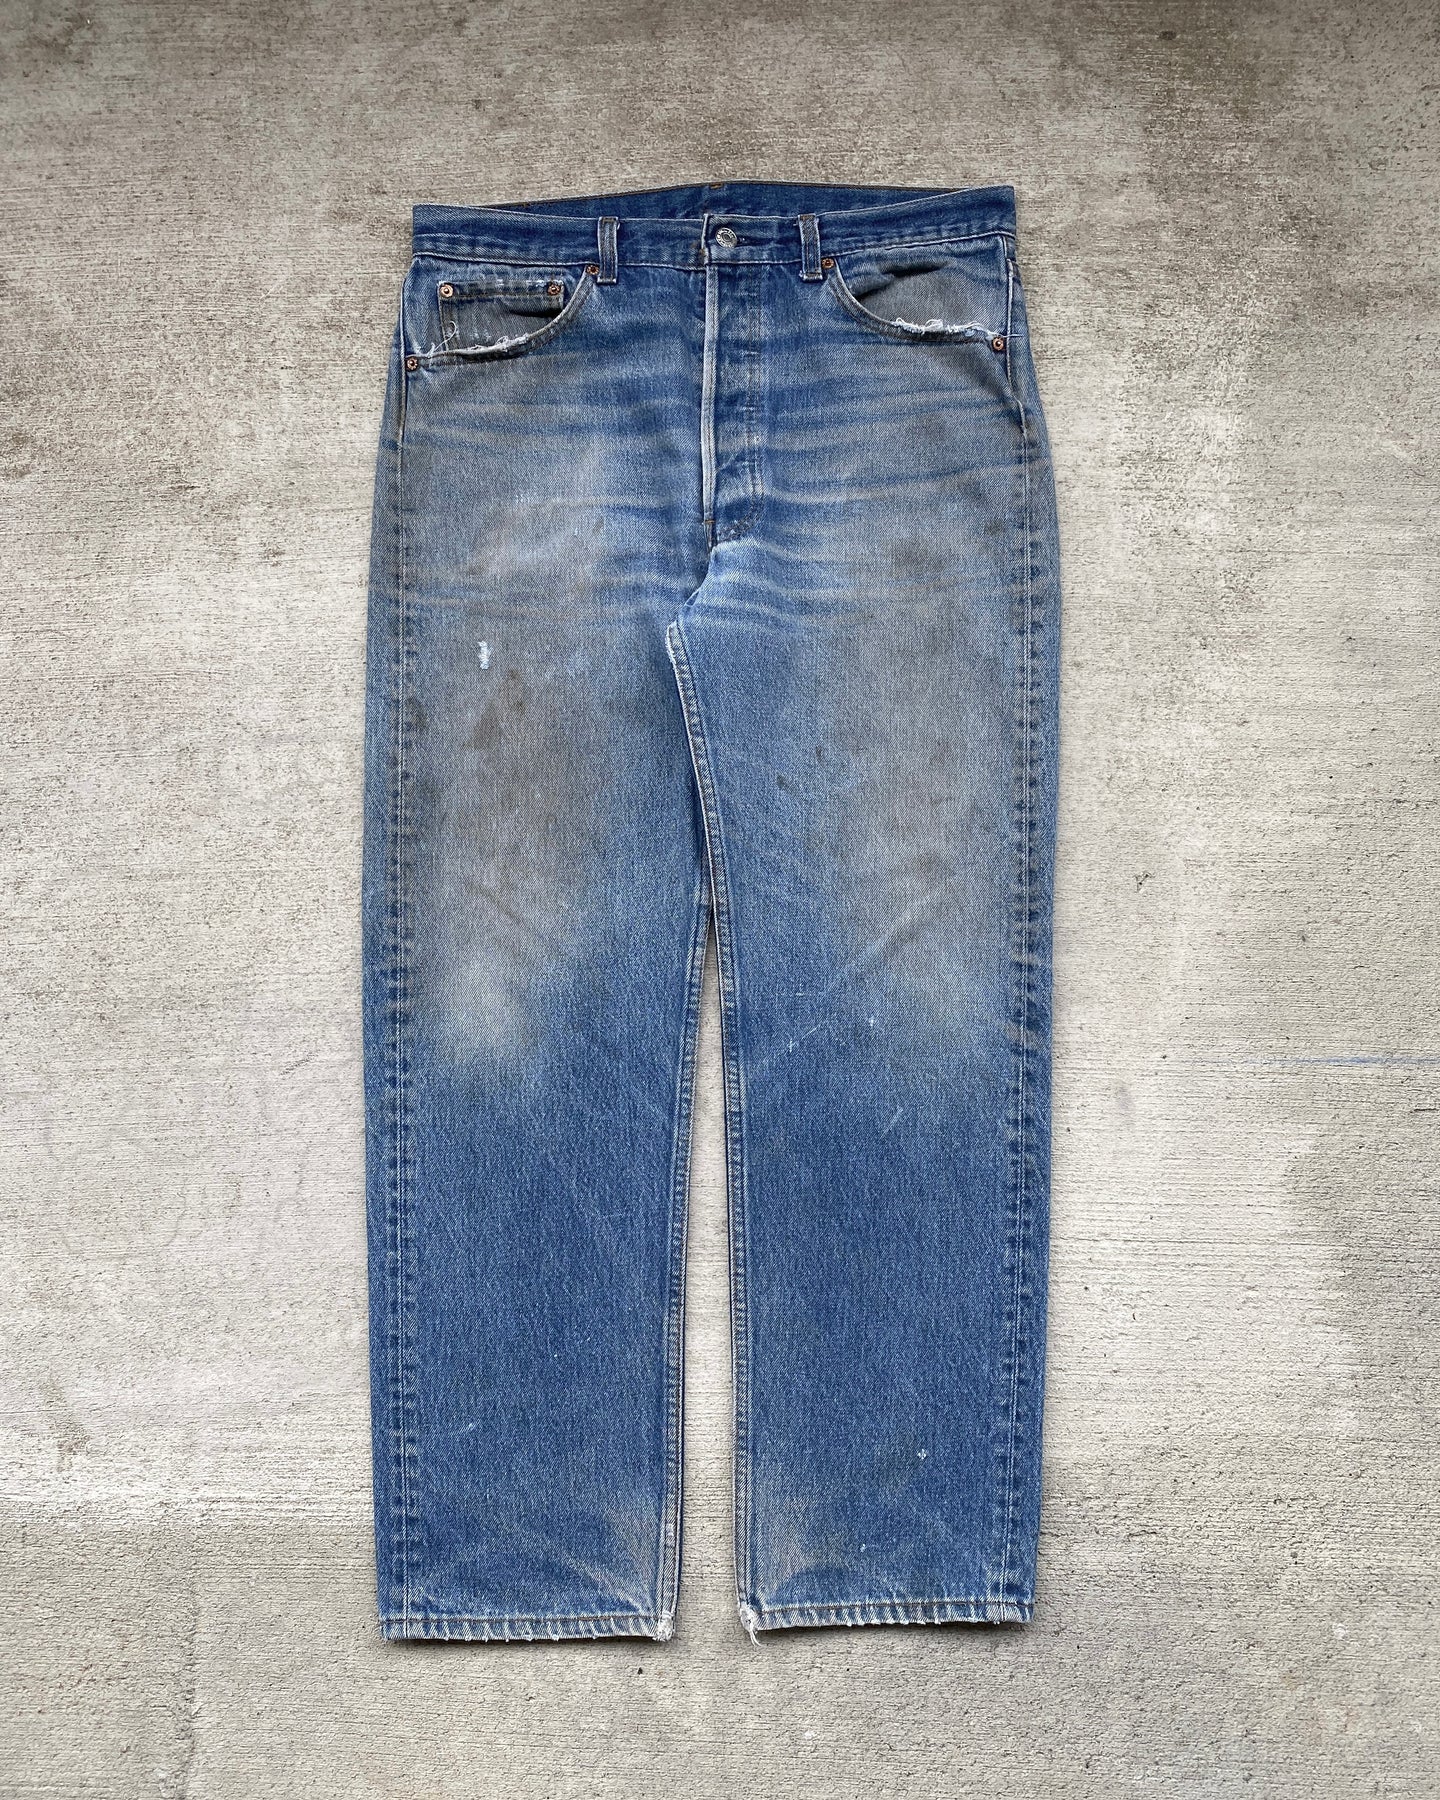 1990s Levi's Dirty Wash 501 - Size 34 x 29